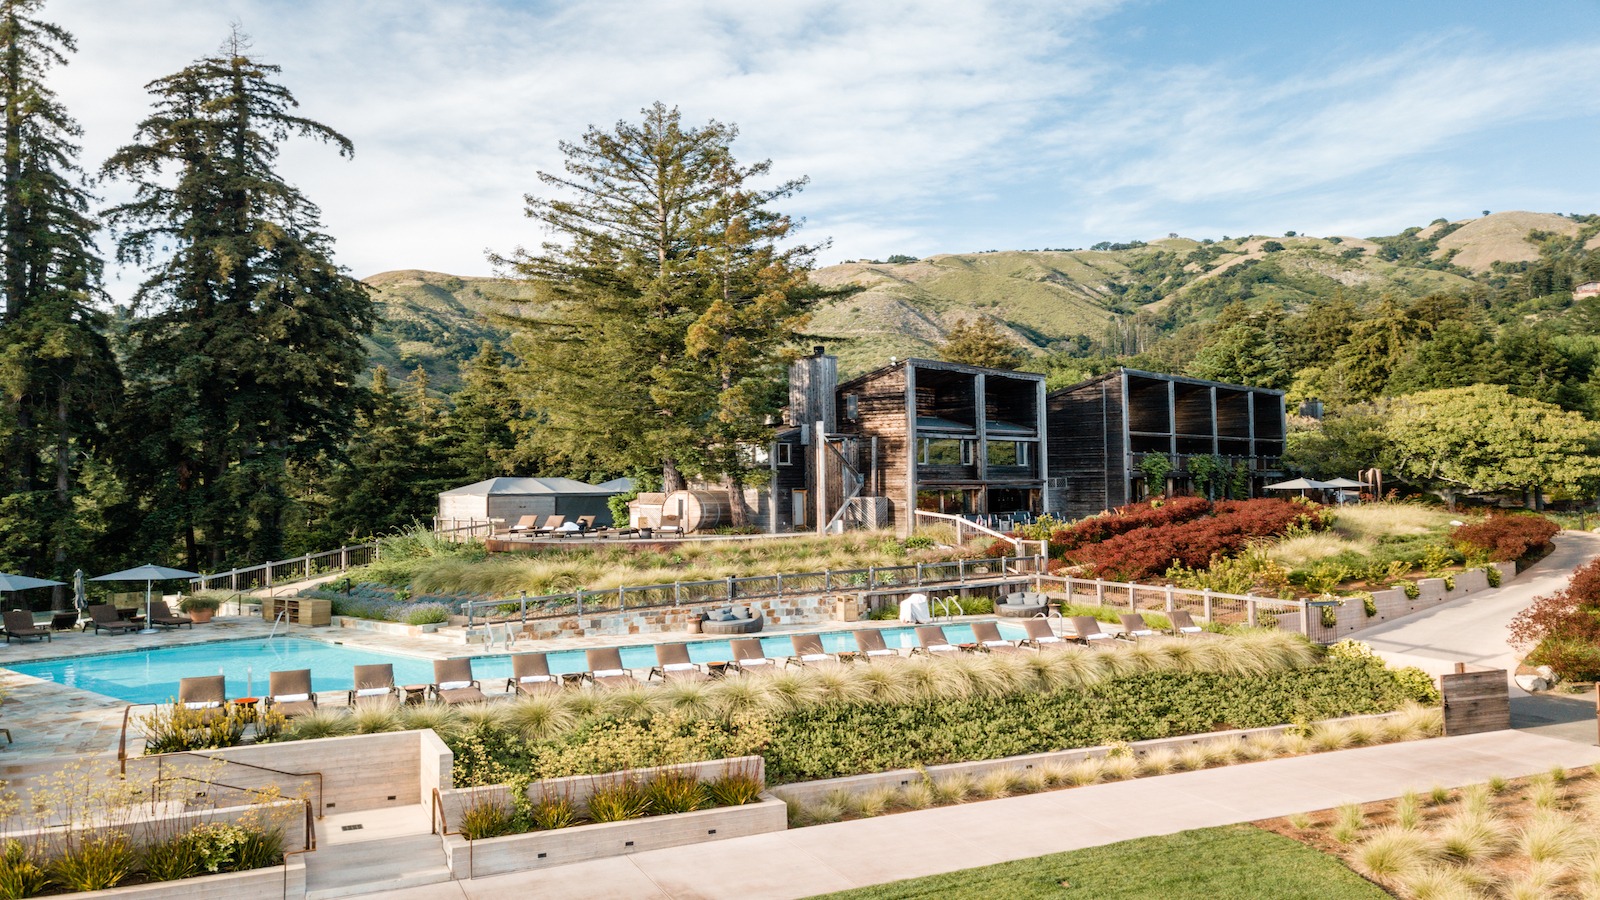 Swimming pool and garden at the spa and wellness hotel Ventana in Big Sur, California